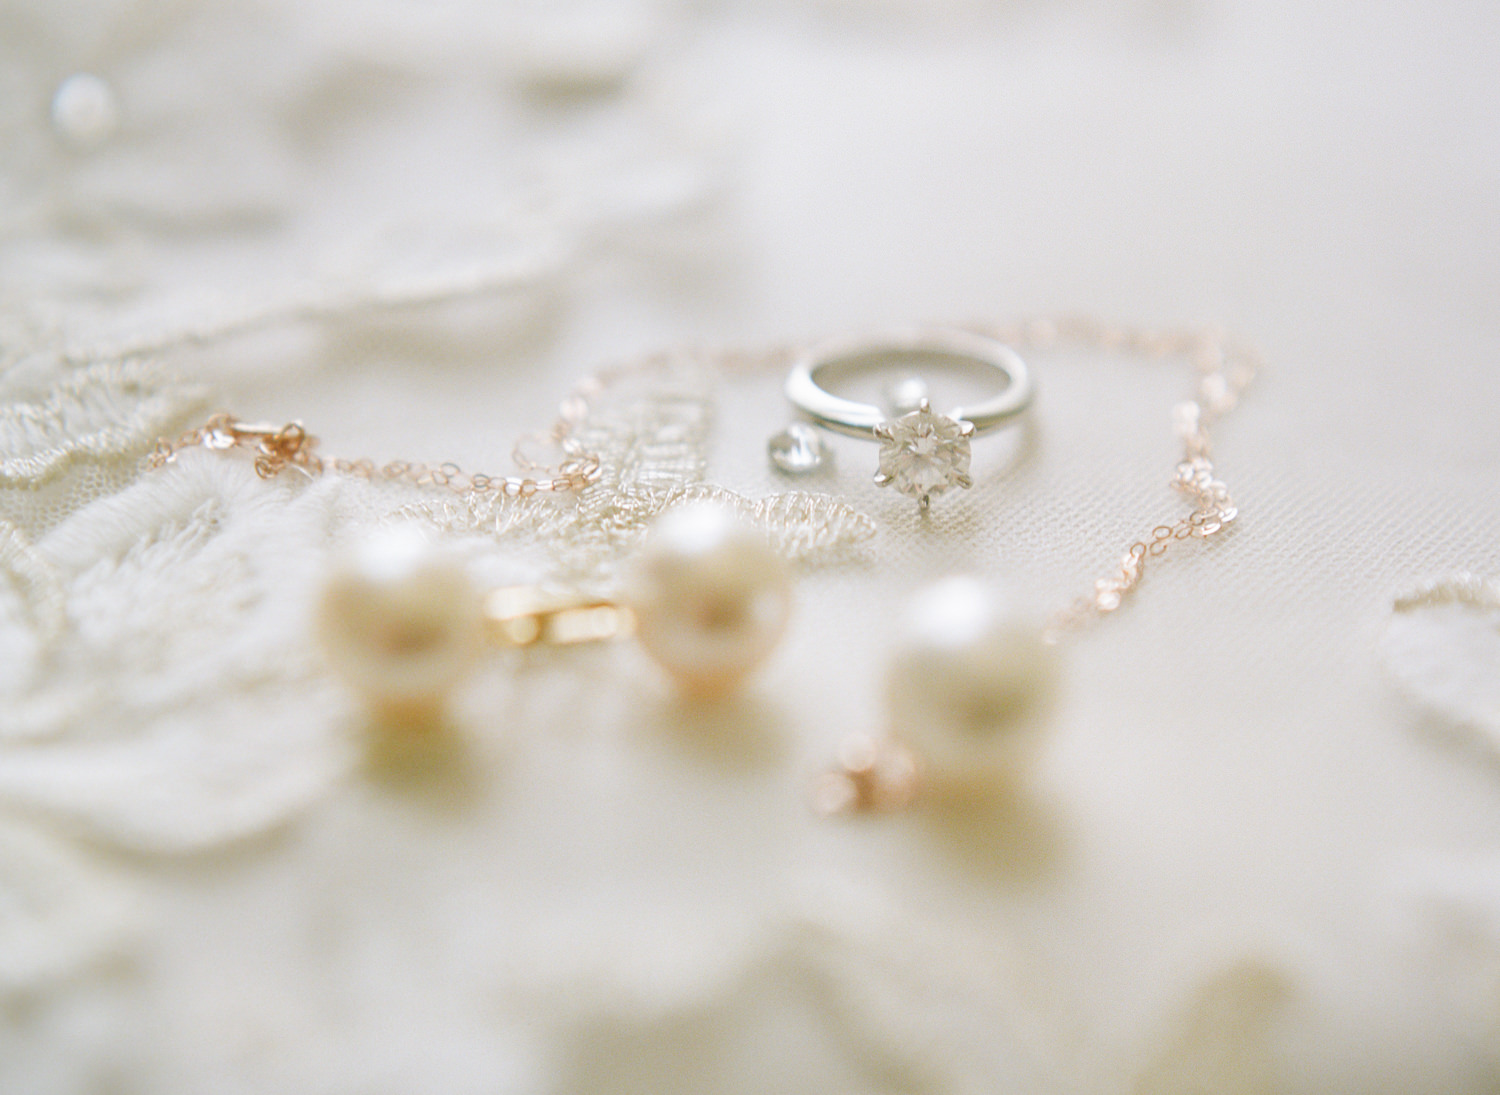 Engagement ring and pearl jewelry on veil; St. Louis fine art film wedding photographer Erica Robnett Photography